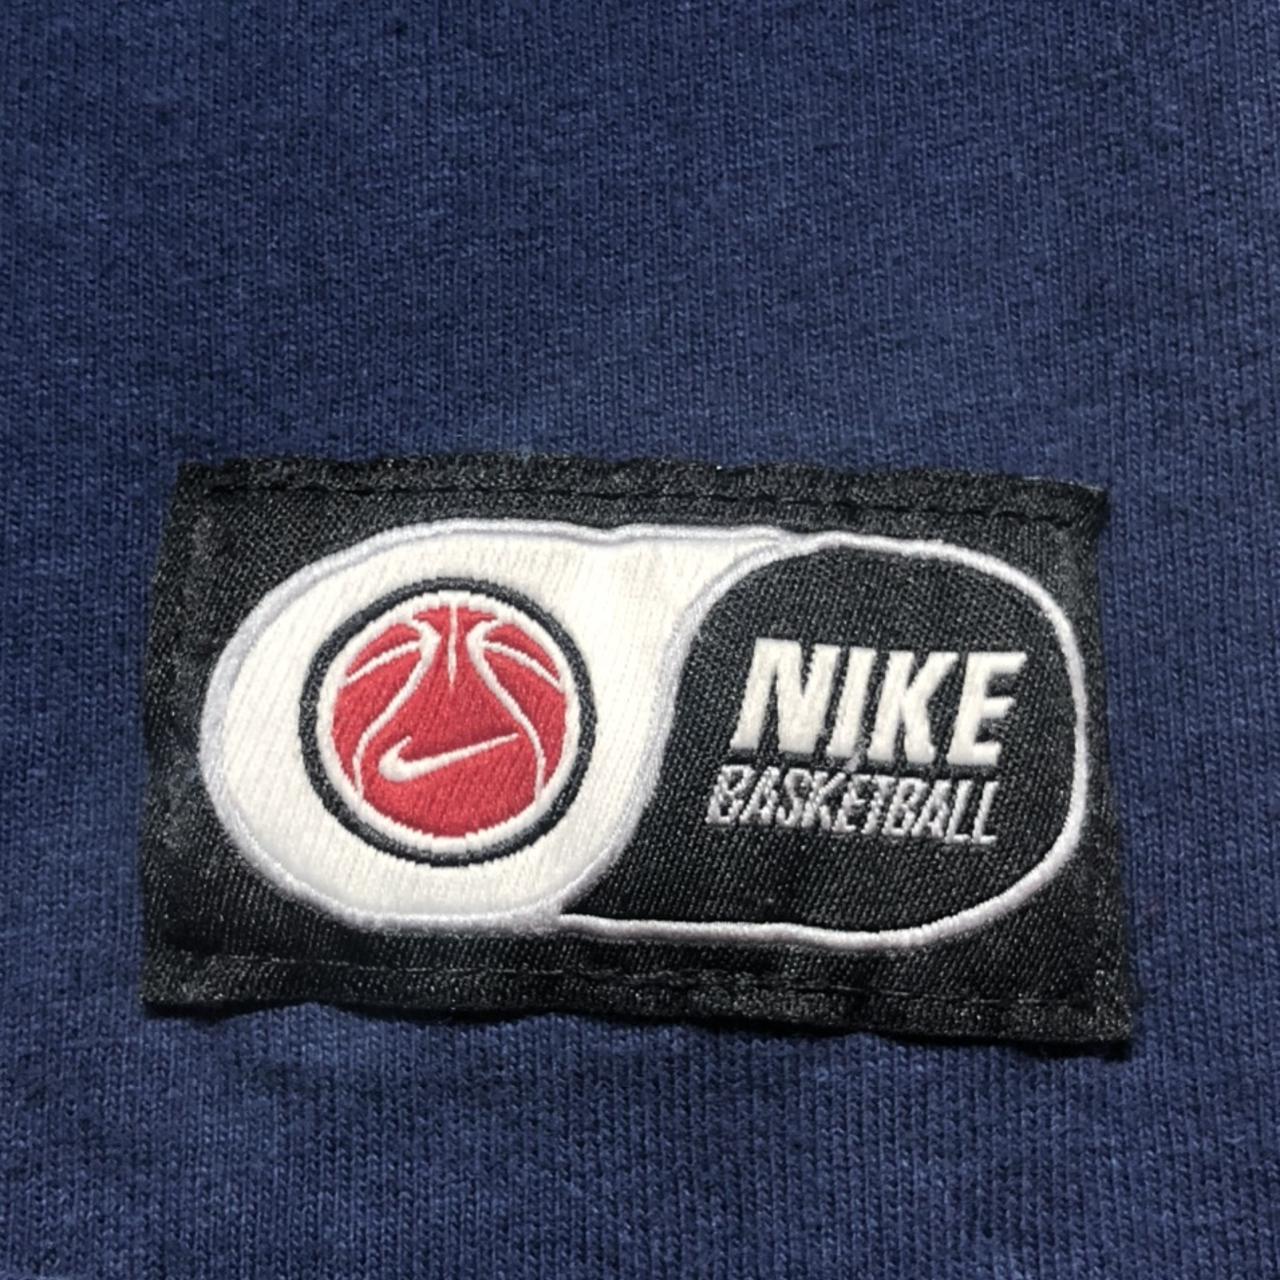 Product Image 2 - 90’s Nike Center Stitch
Tank Top

Navy